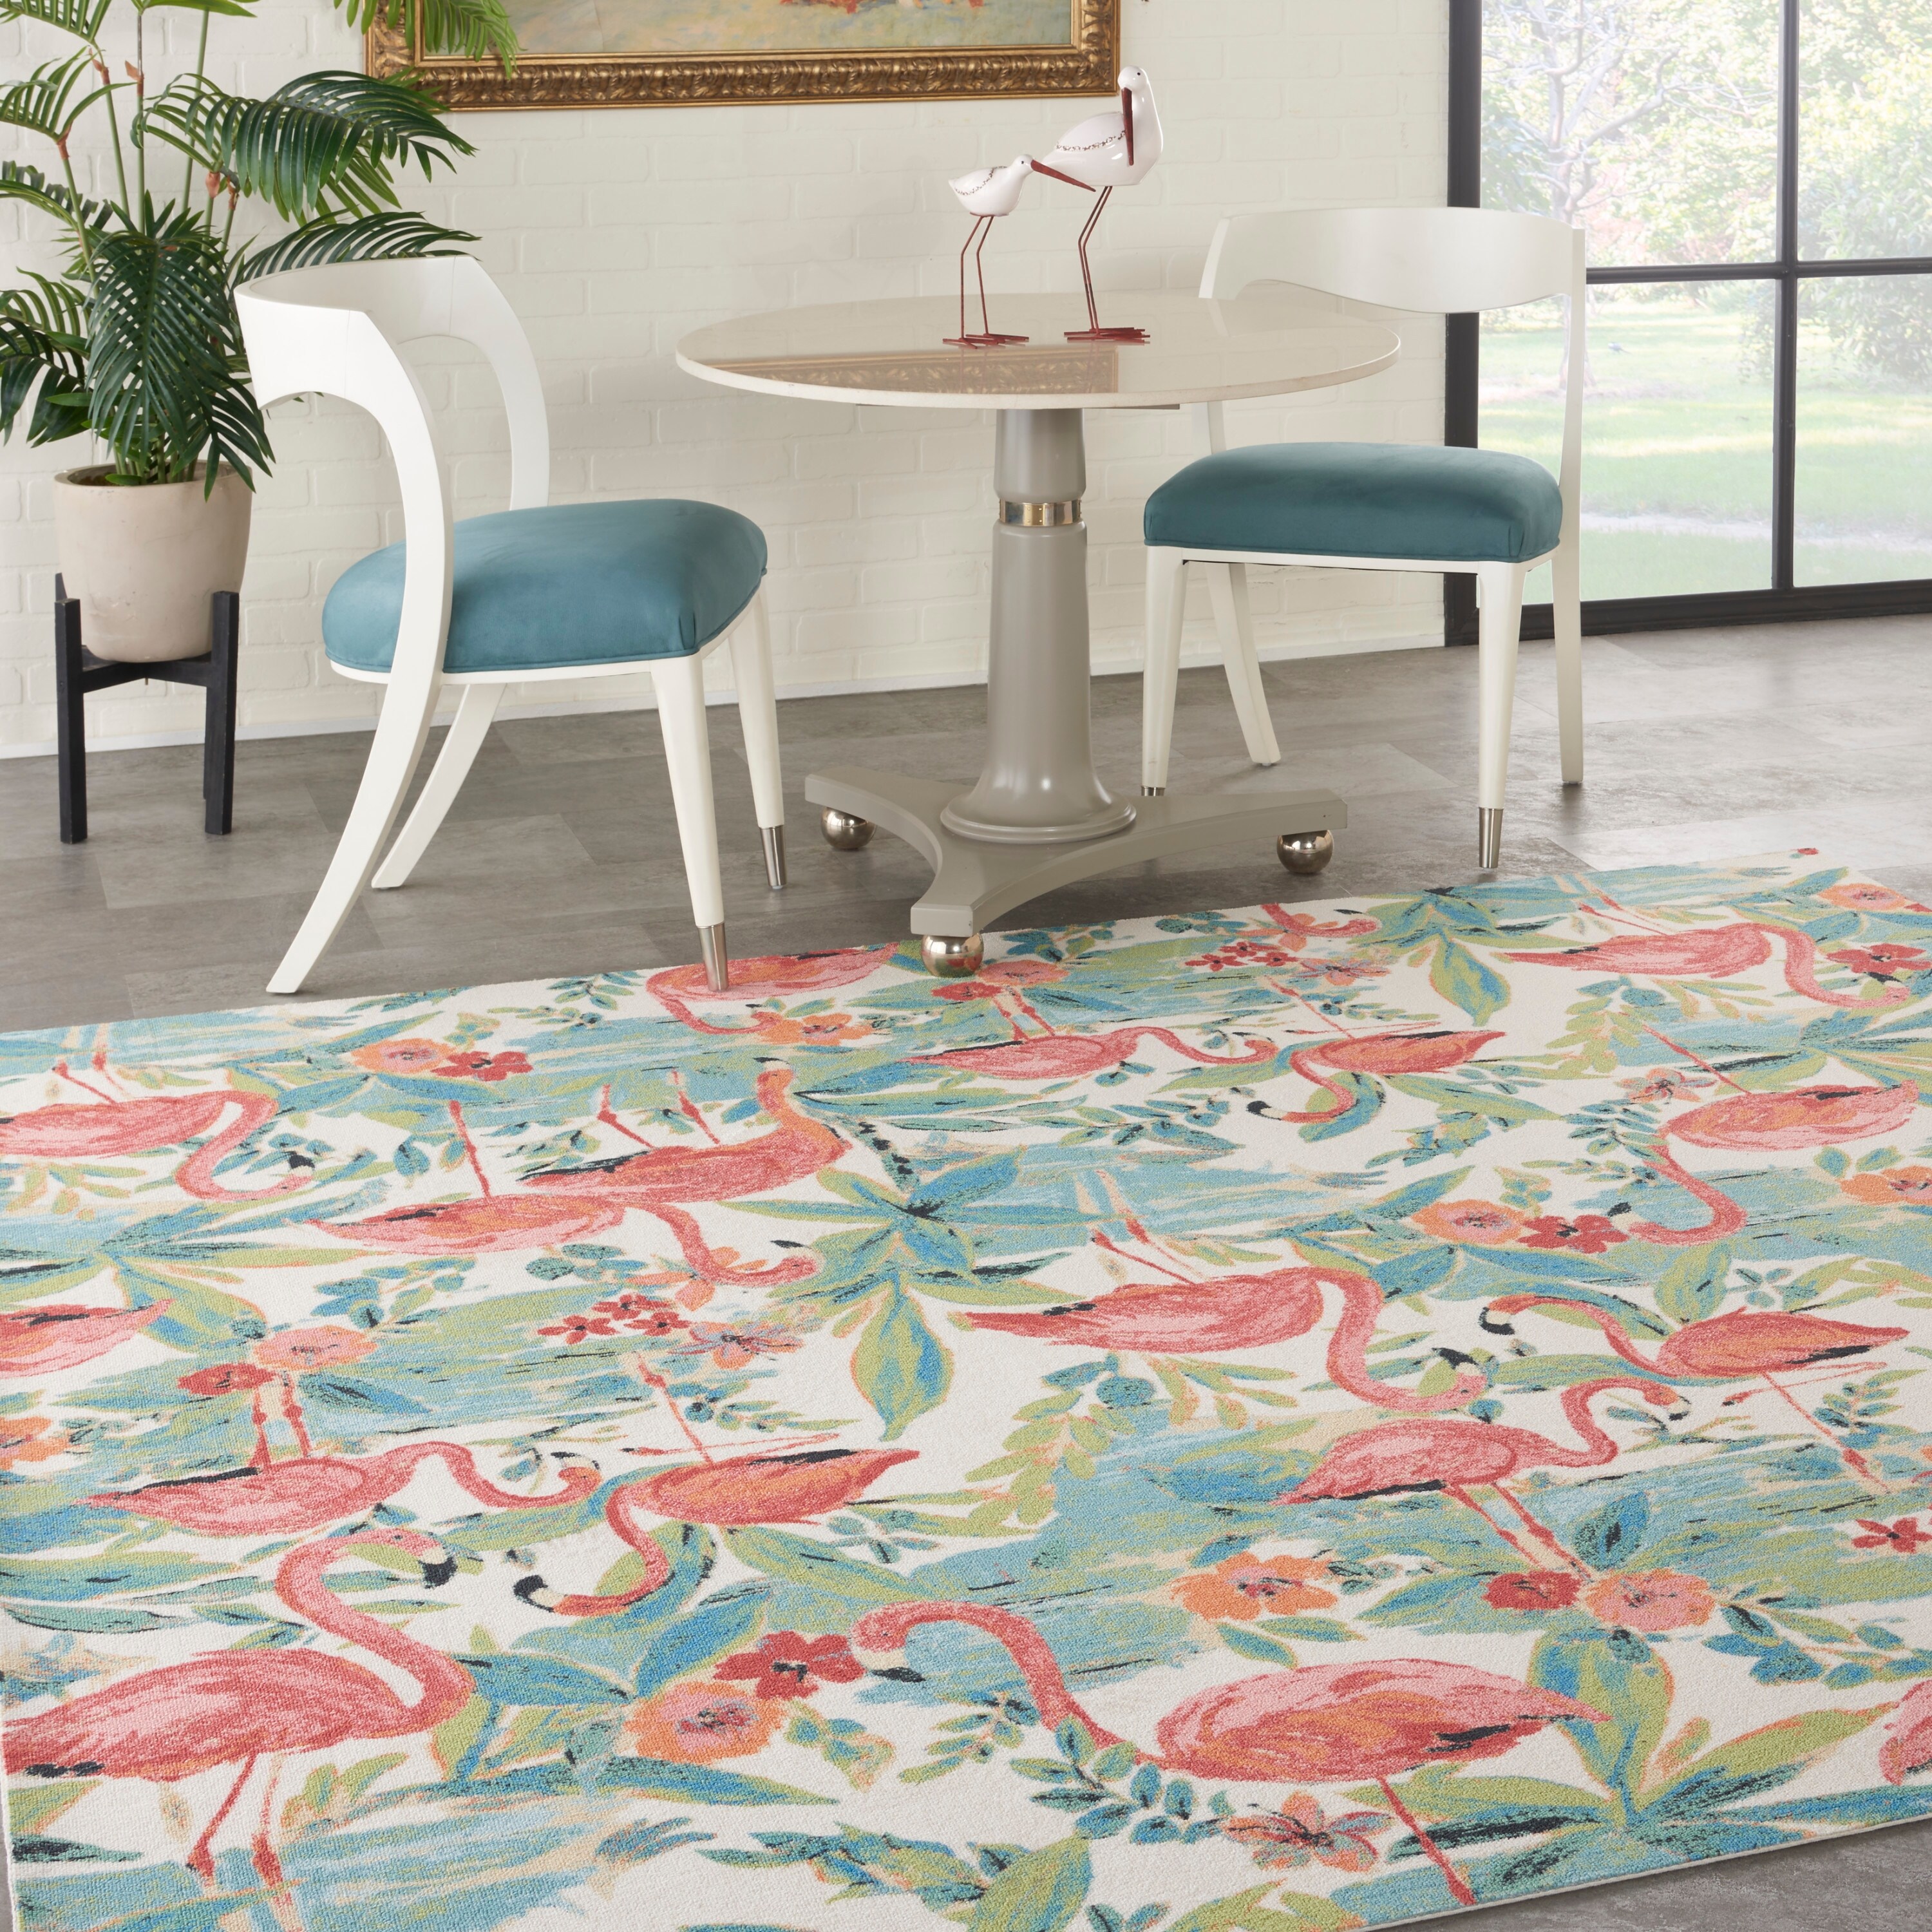 Outdoor Carpet: Affordable Solutions with Indoor-Outdoor Rugs